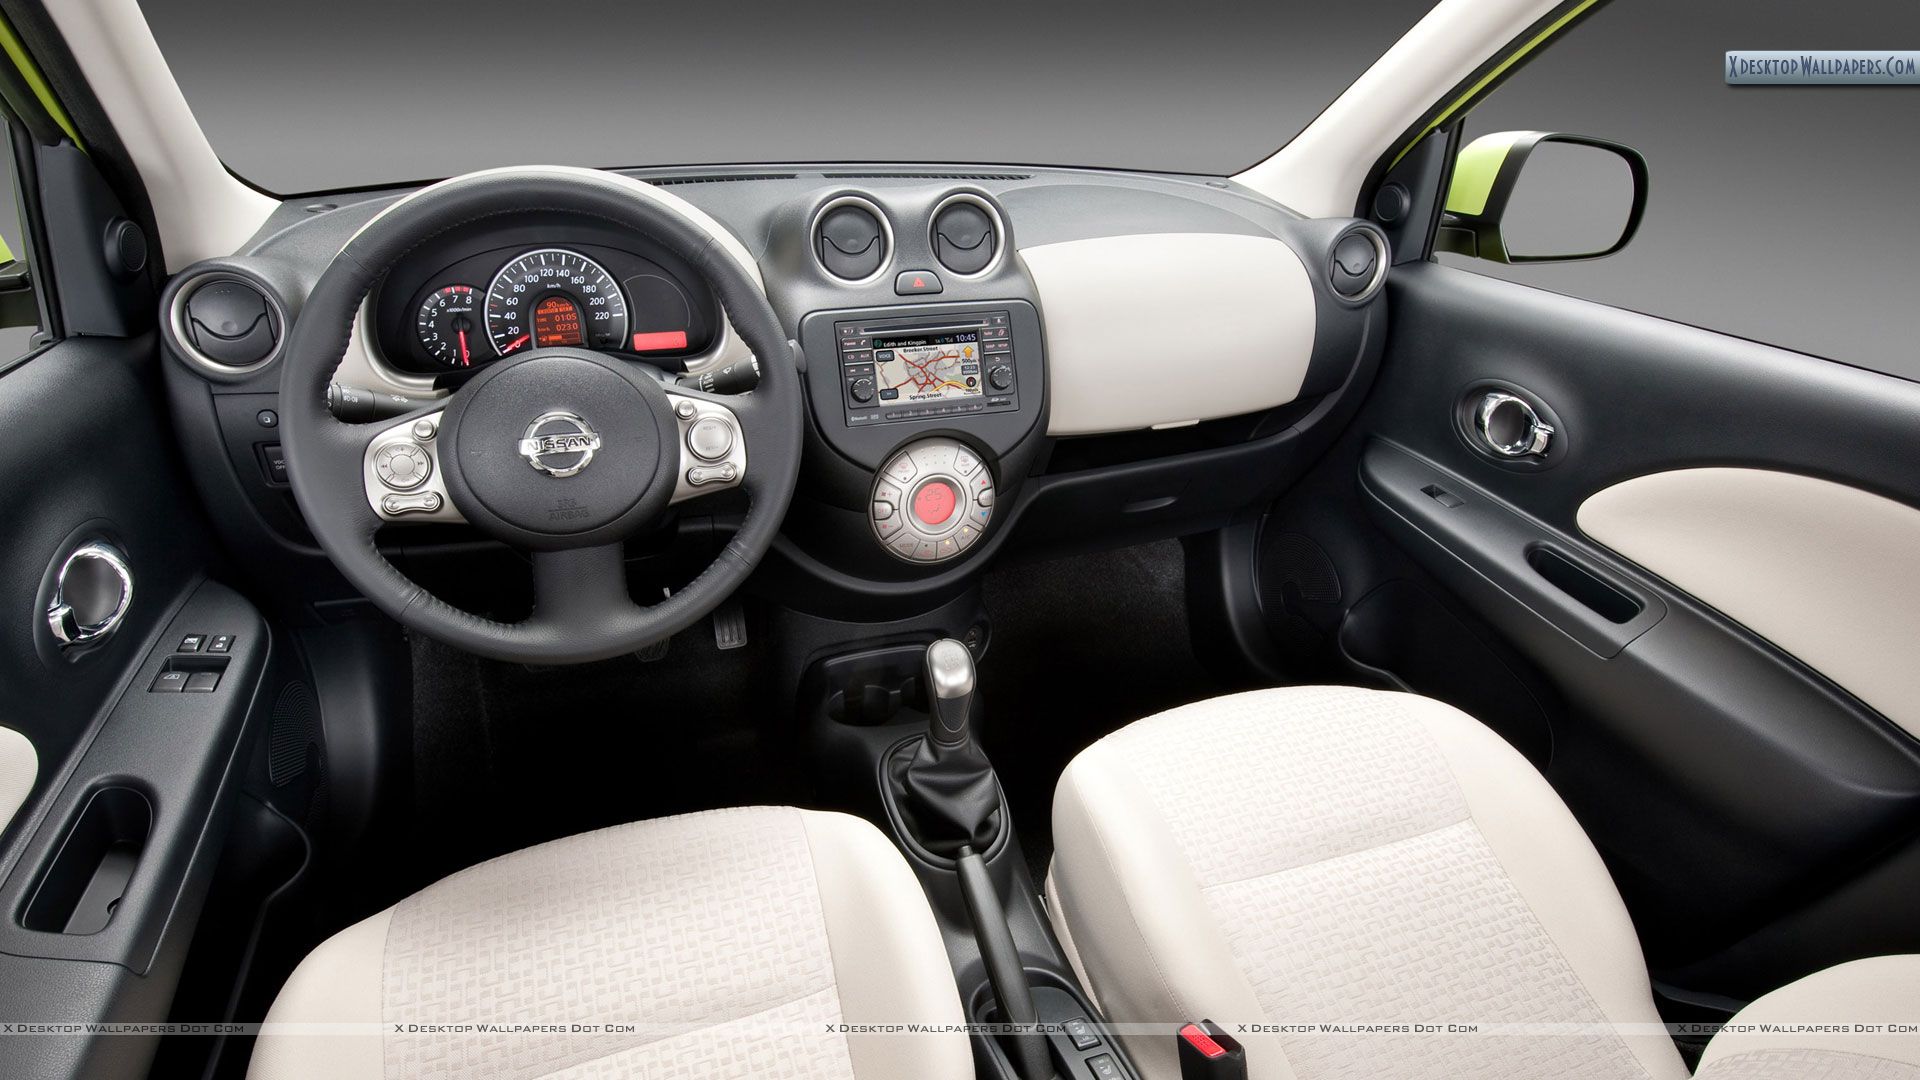 Nissan Micra Wallpaper Photos Image In HD